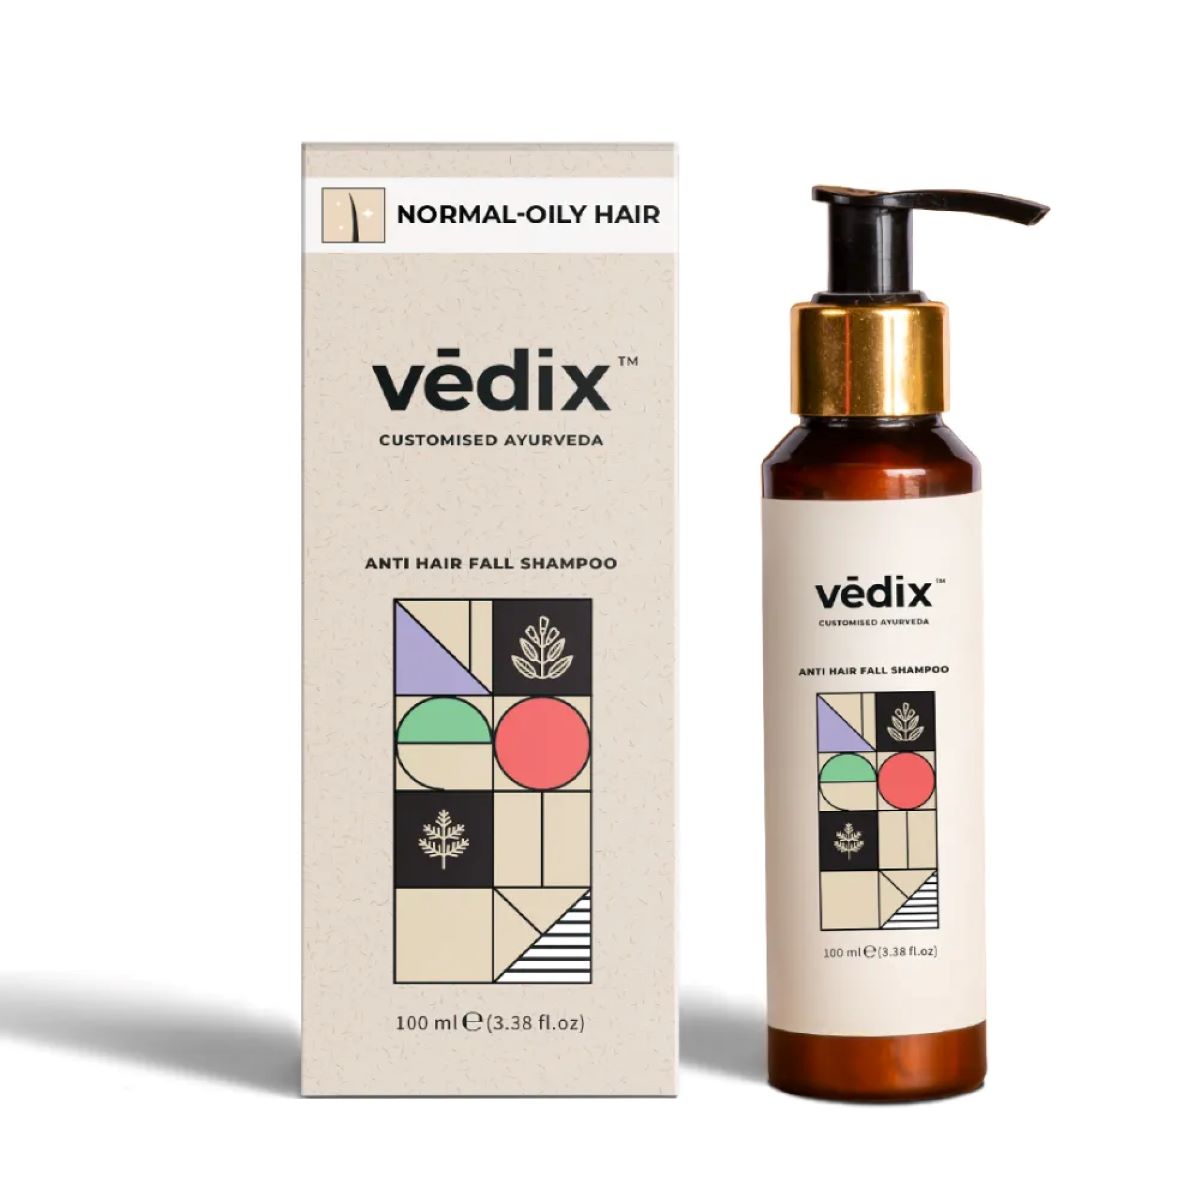 Vedix Hair Care: Genuine Or Scam? Unveiling The Truth!